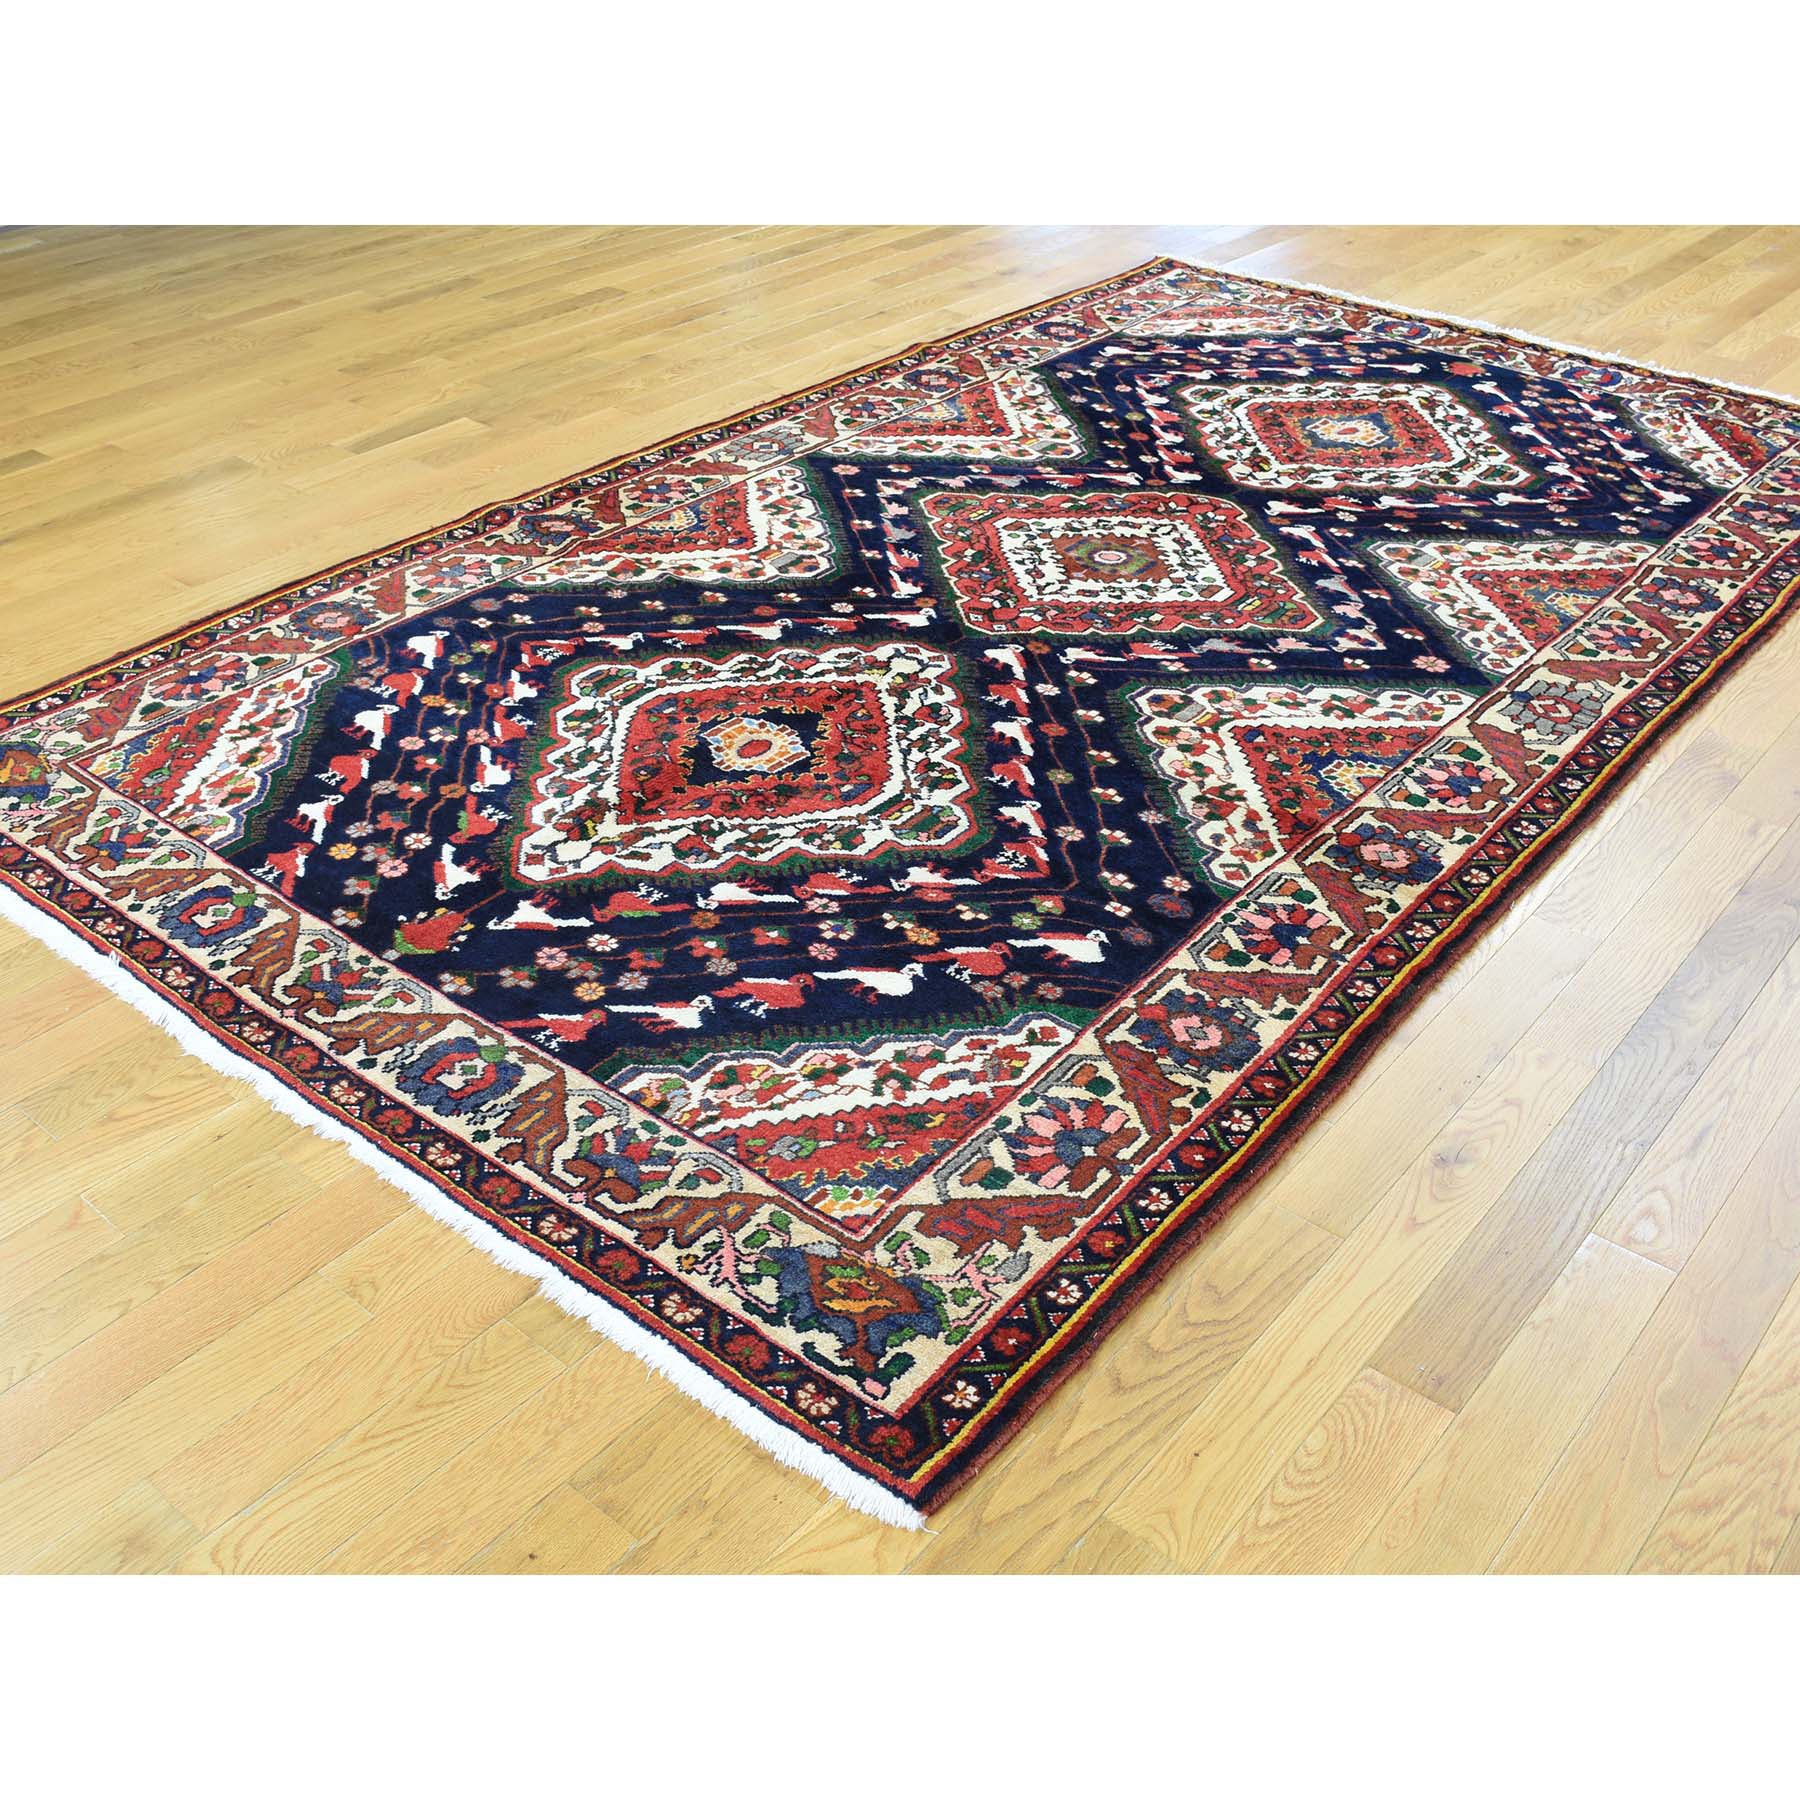 5-9 x9-10  Hand-Knotted Persian Bakhtiari Exc Cond Oriental Rug 